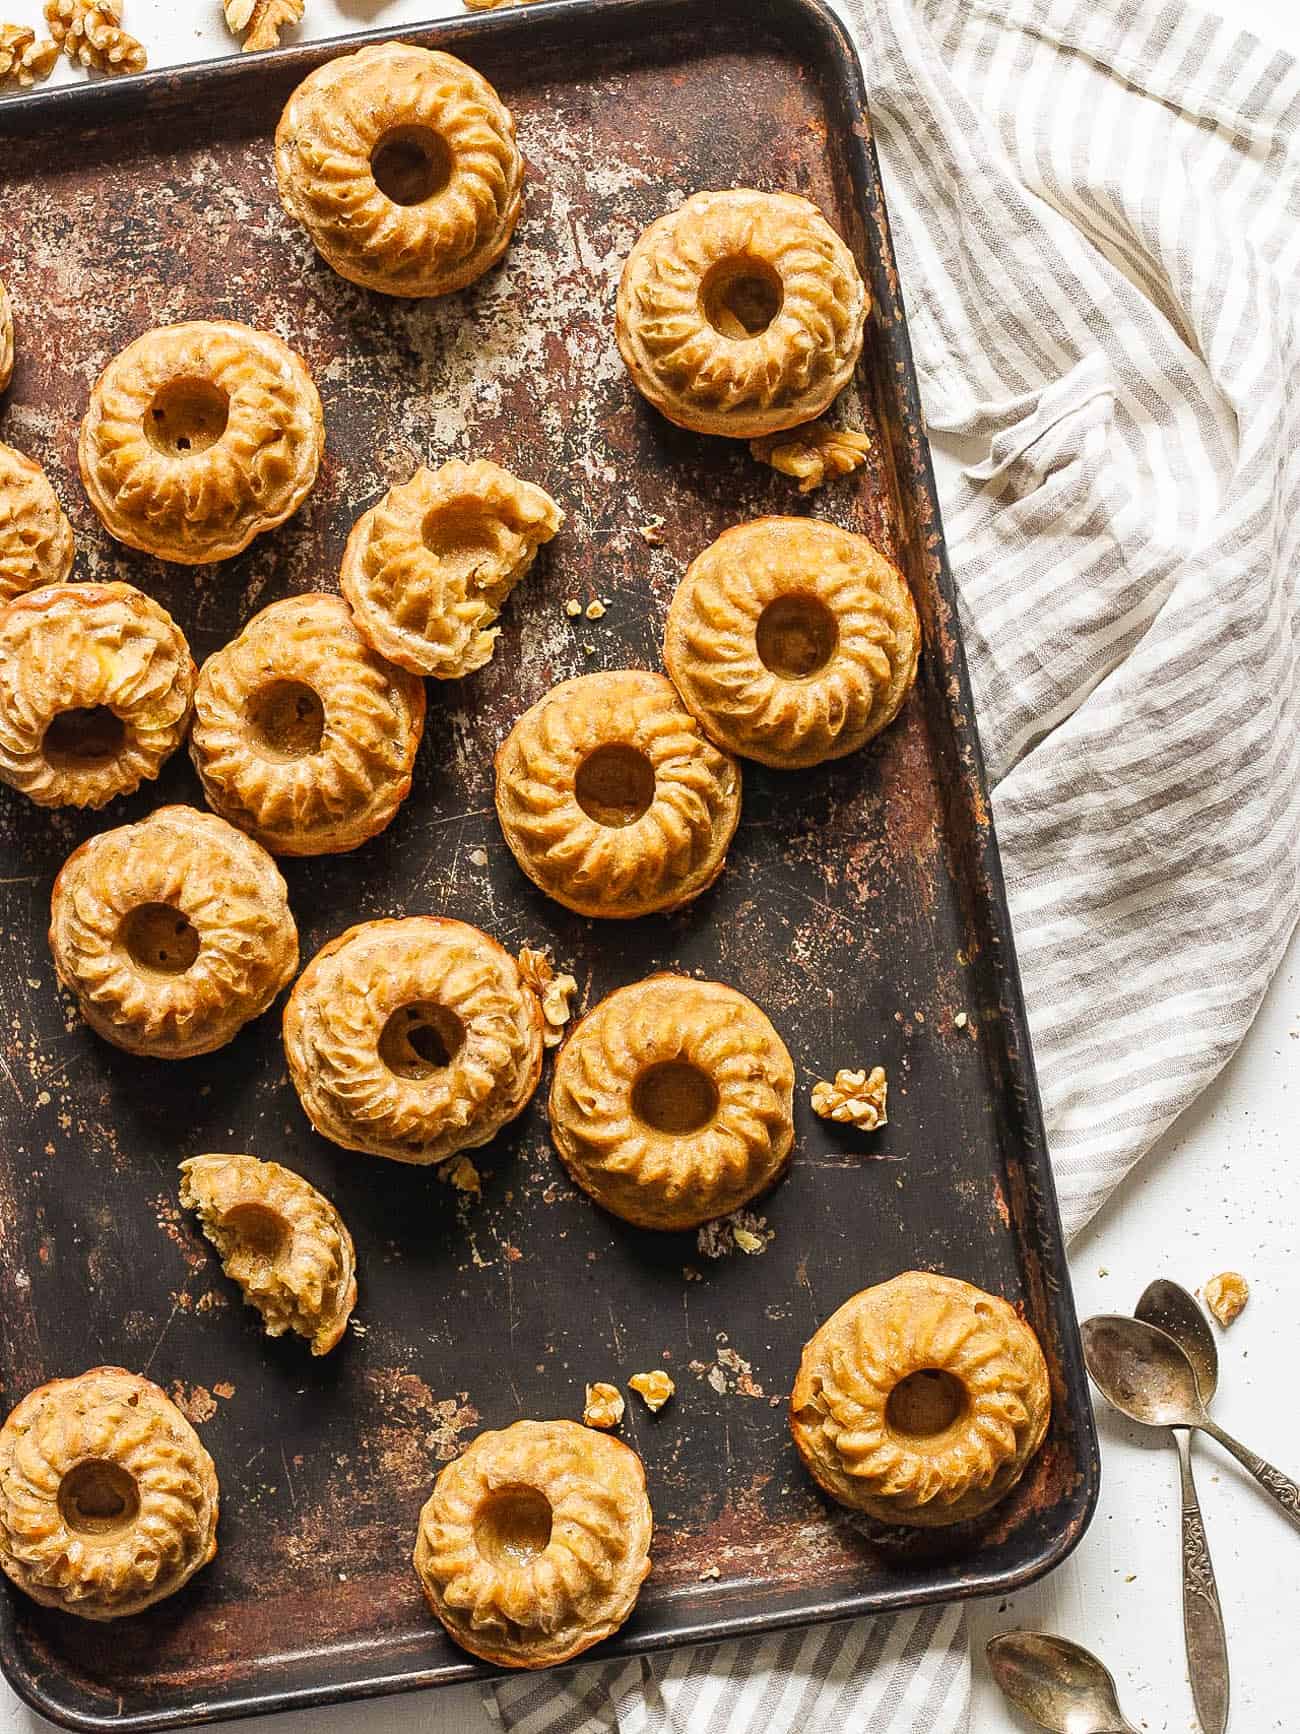 Mini Bundt Cakes with Bananas and Walnuts (Healthy, No Oil!)